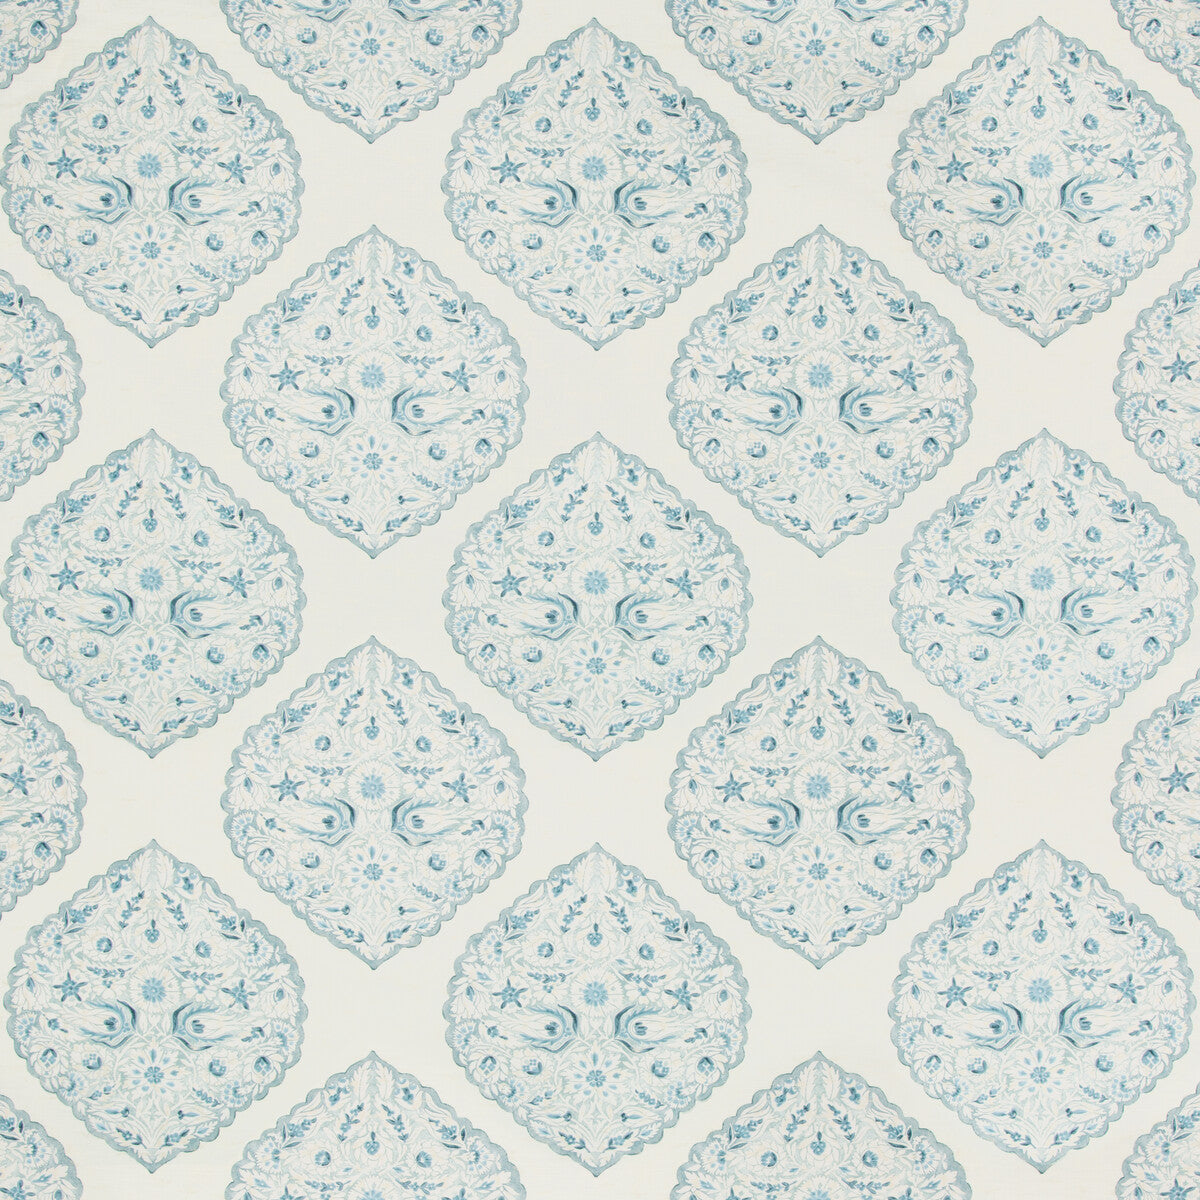 Lido Print fabric in sky color - pattern 2017165.5.0 - by Lee Jofa in the Westport collection